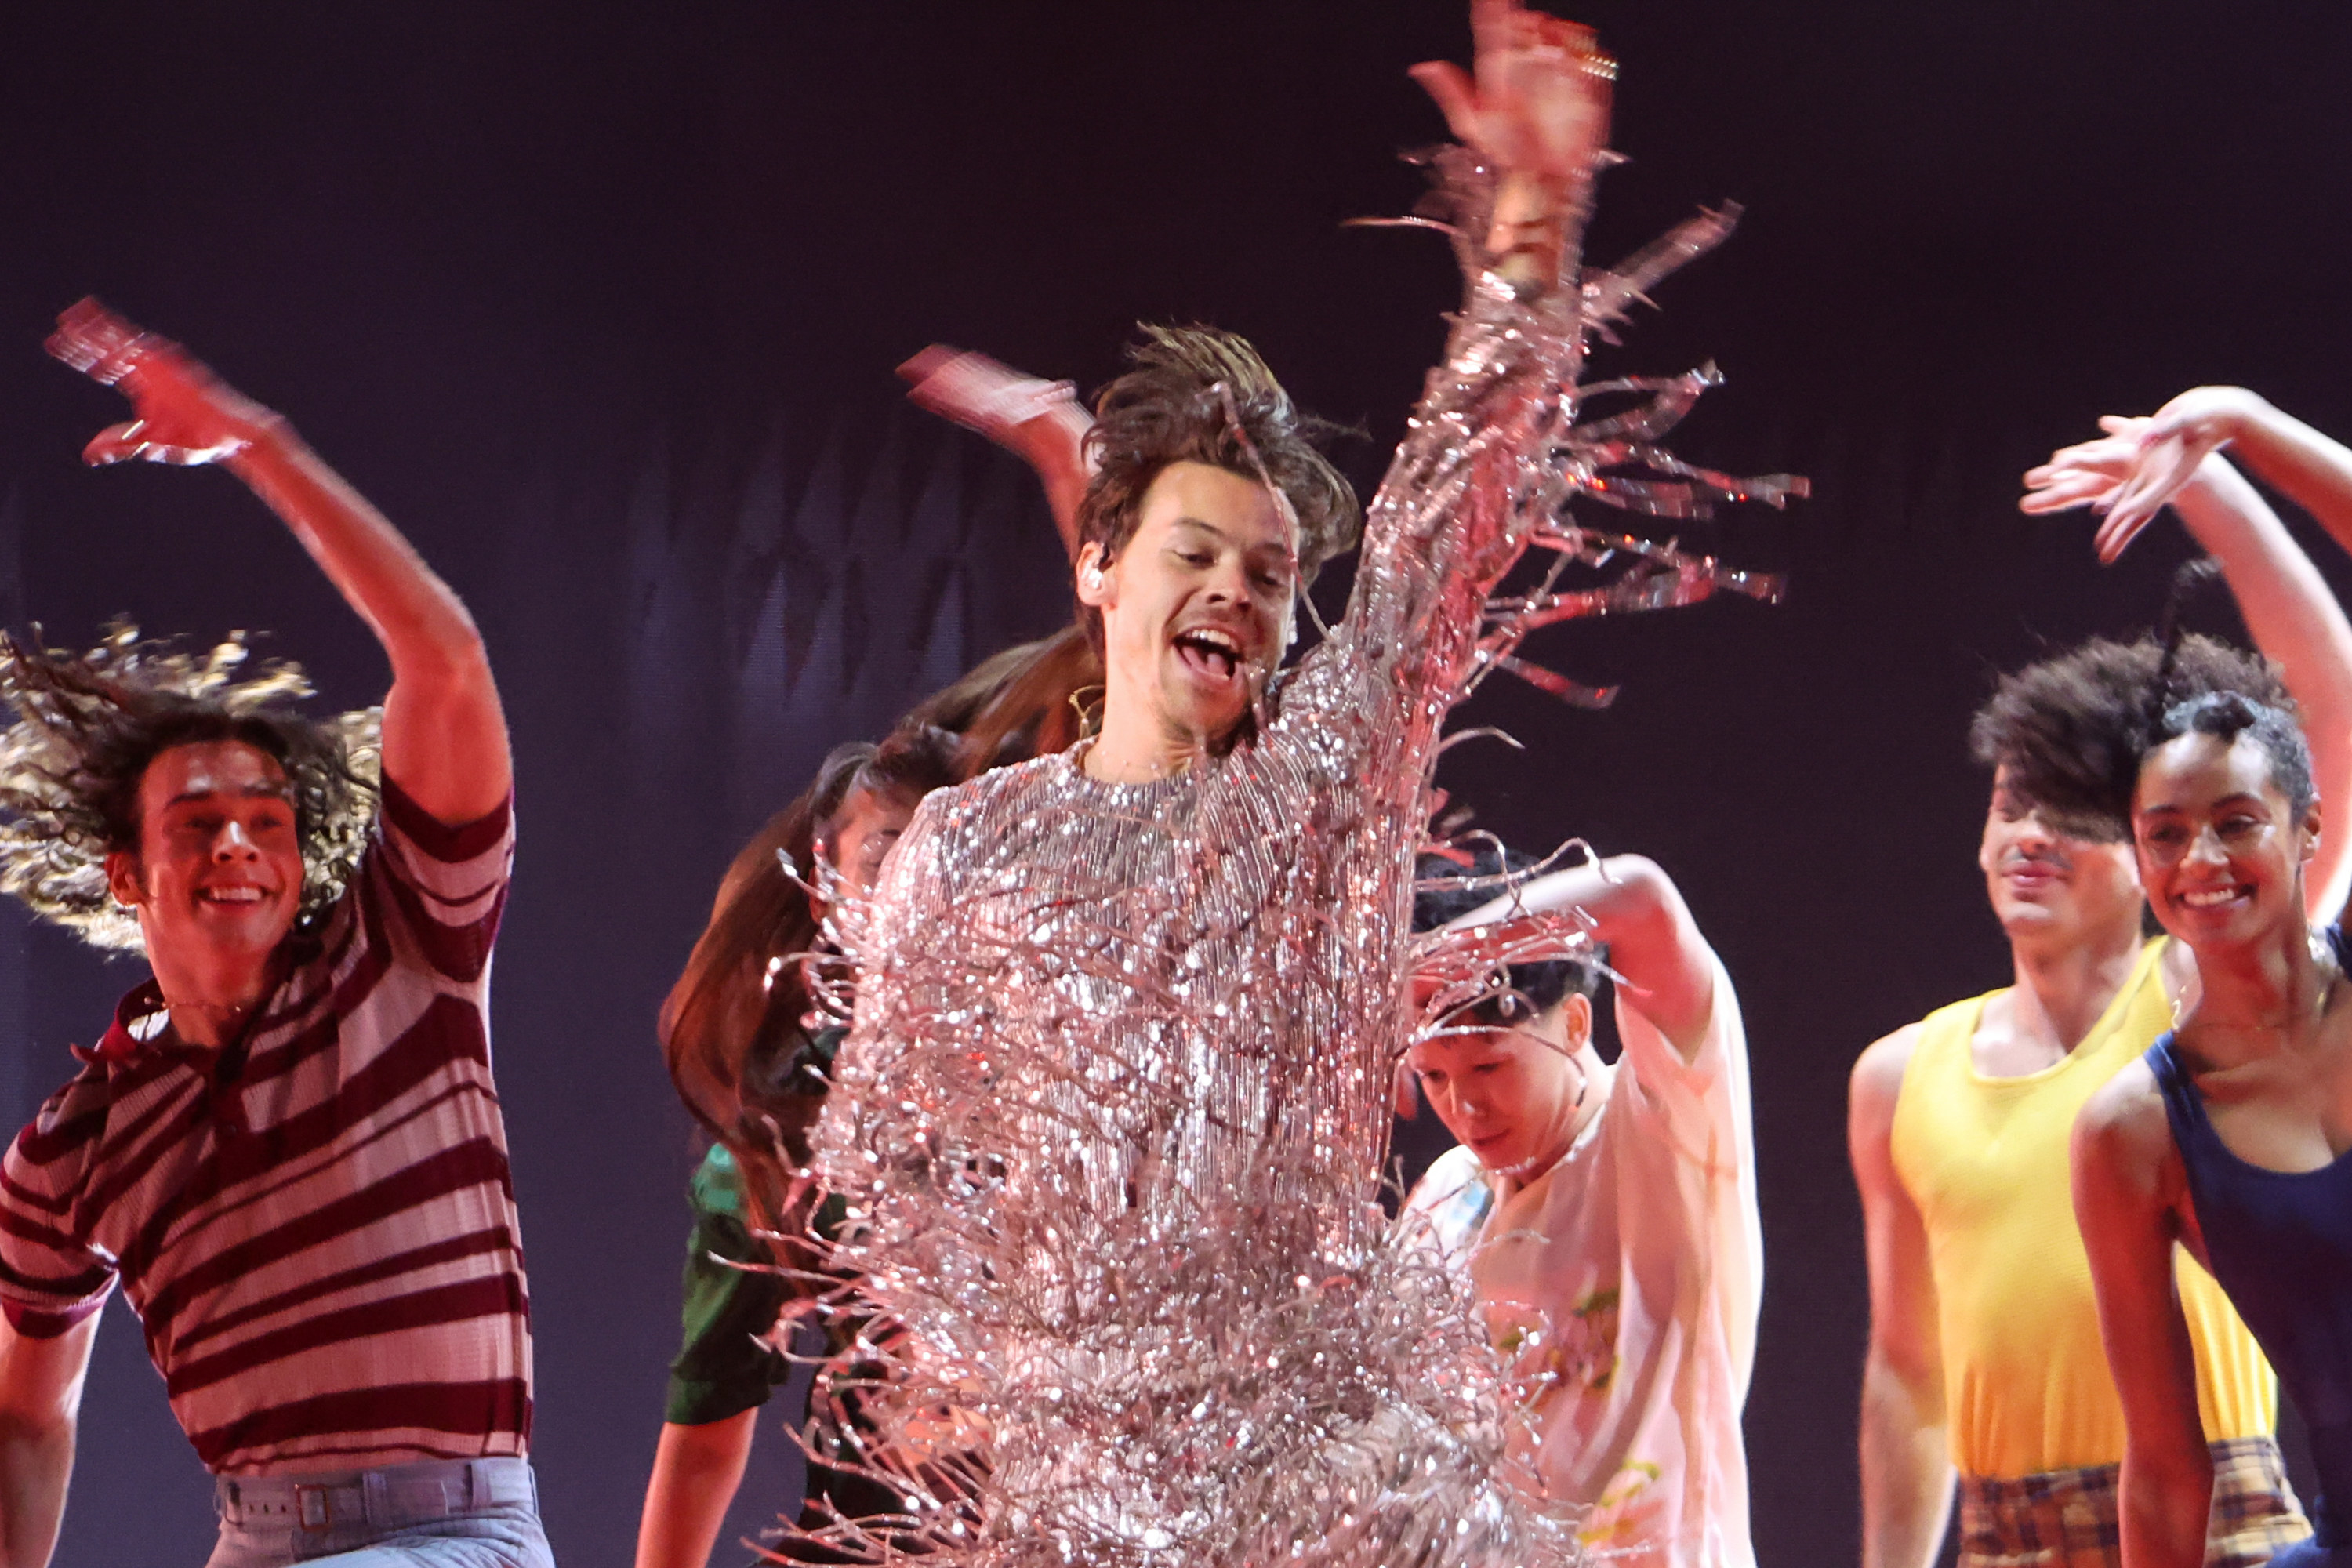 Harry Styles dances with an arm over his head surrounded by dancers mirroring the motion